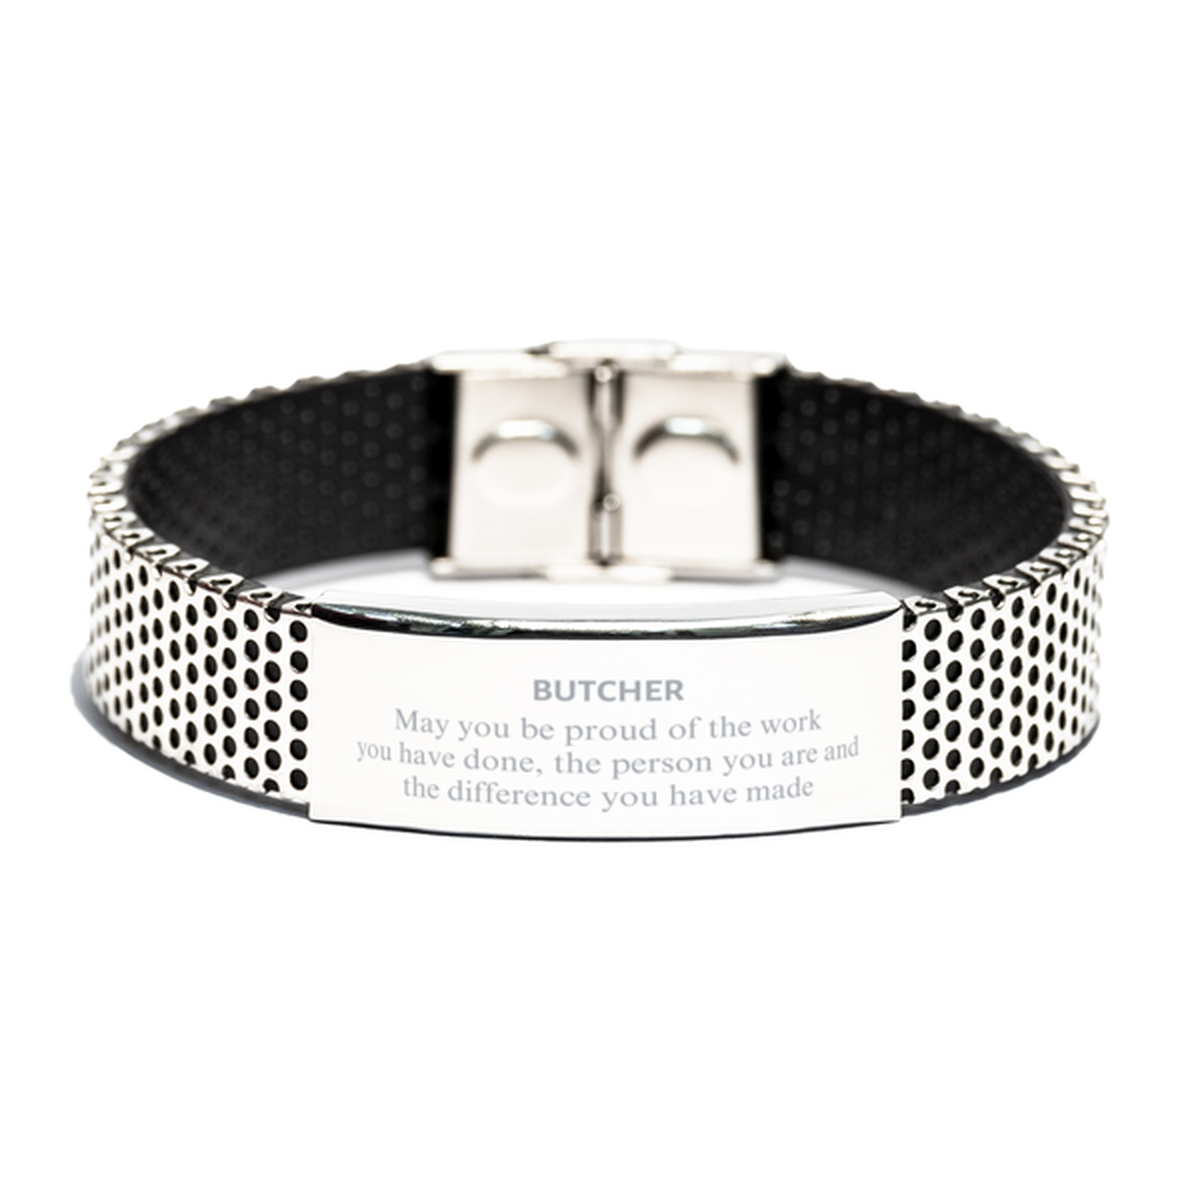 Butcher May you be proud of the work you have done, Retirement Butcher Stainless Steel Bracelet for Colleague Appreciation Gifts Amazing for Butcher